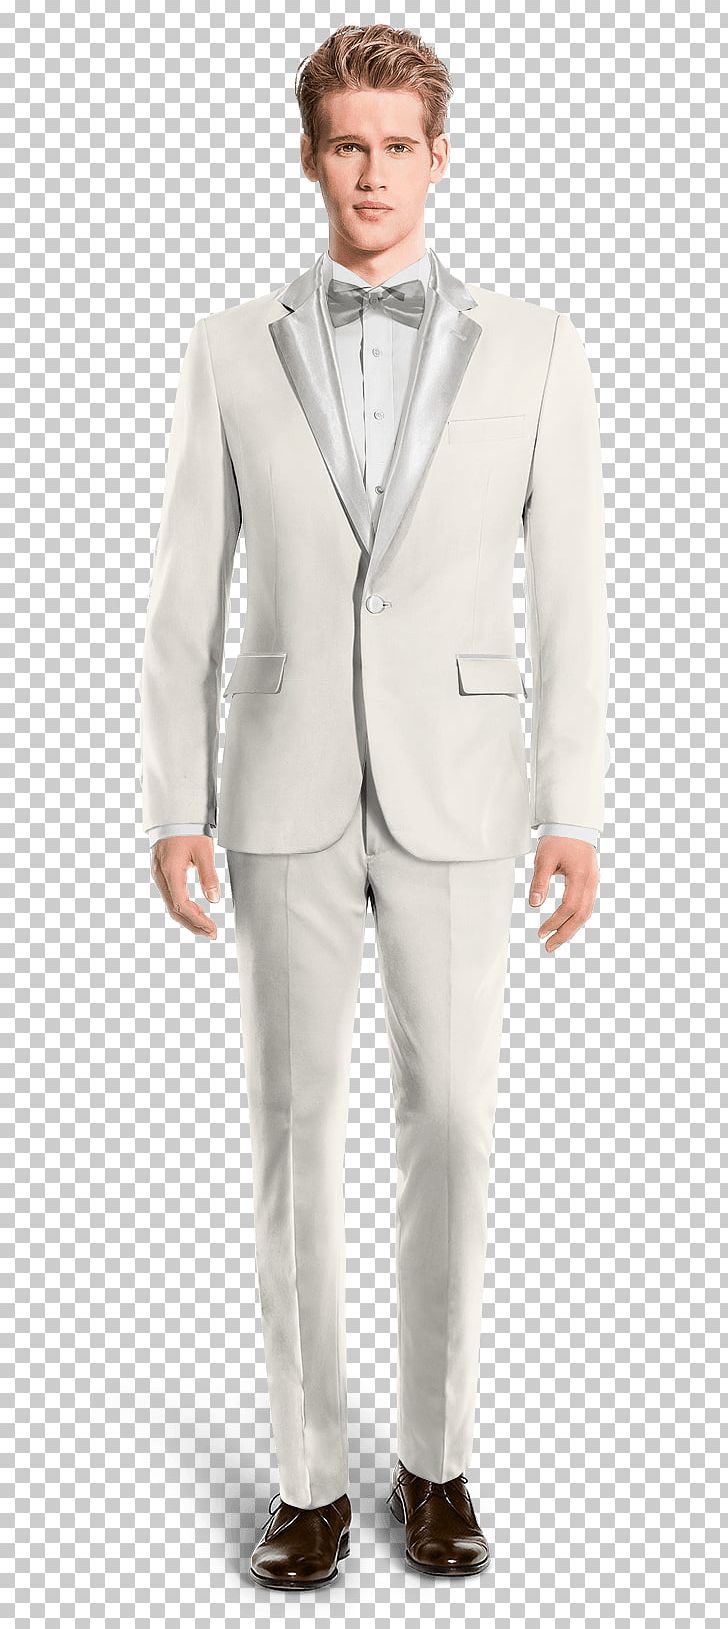 Pants Mao Suit Chino Cloth Jeans PNG, Clipart, Beige, Blazer, Blue, Chino Cloth, Clothing Free PNG Download